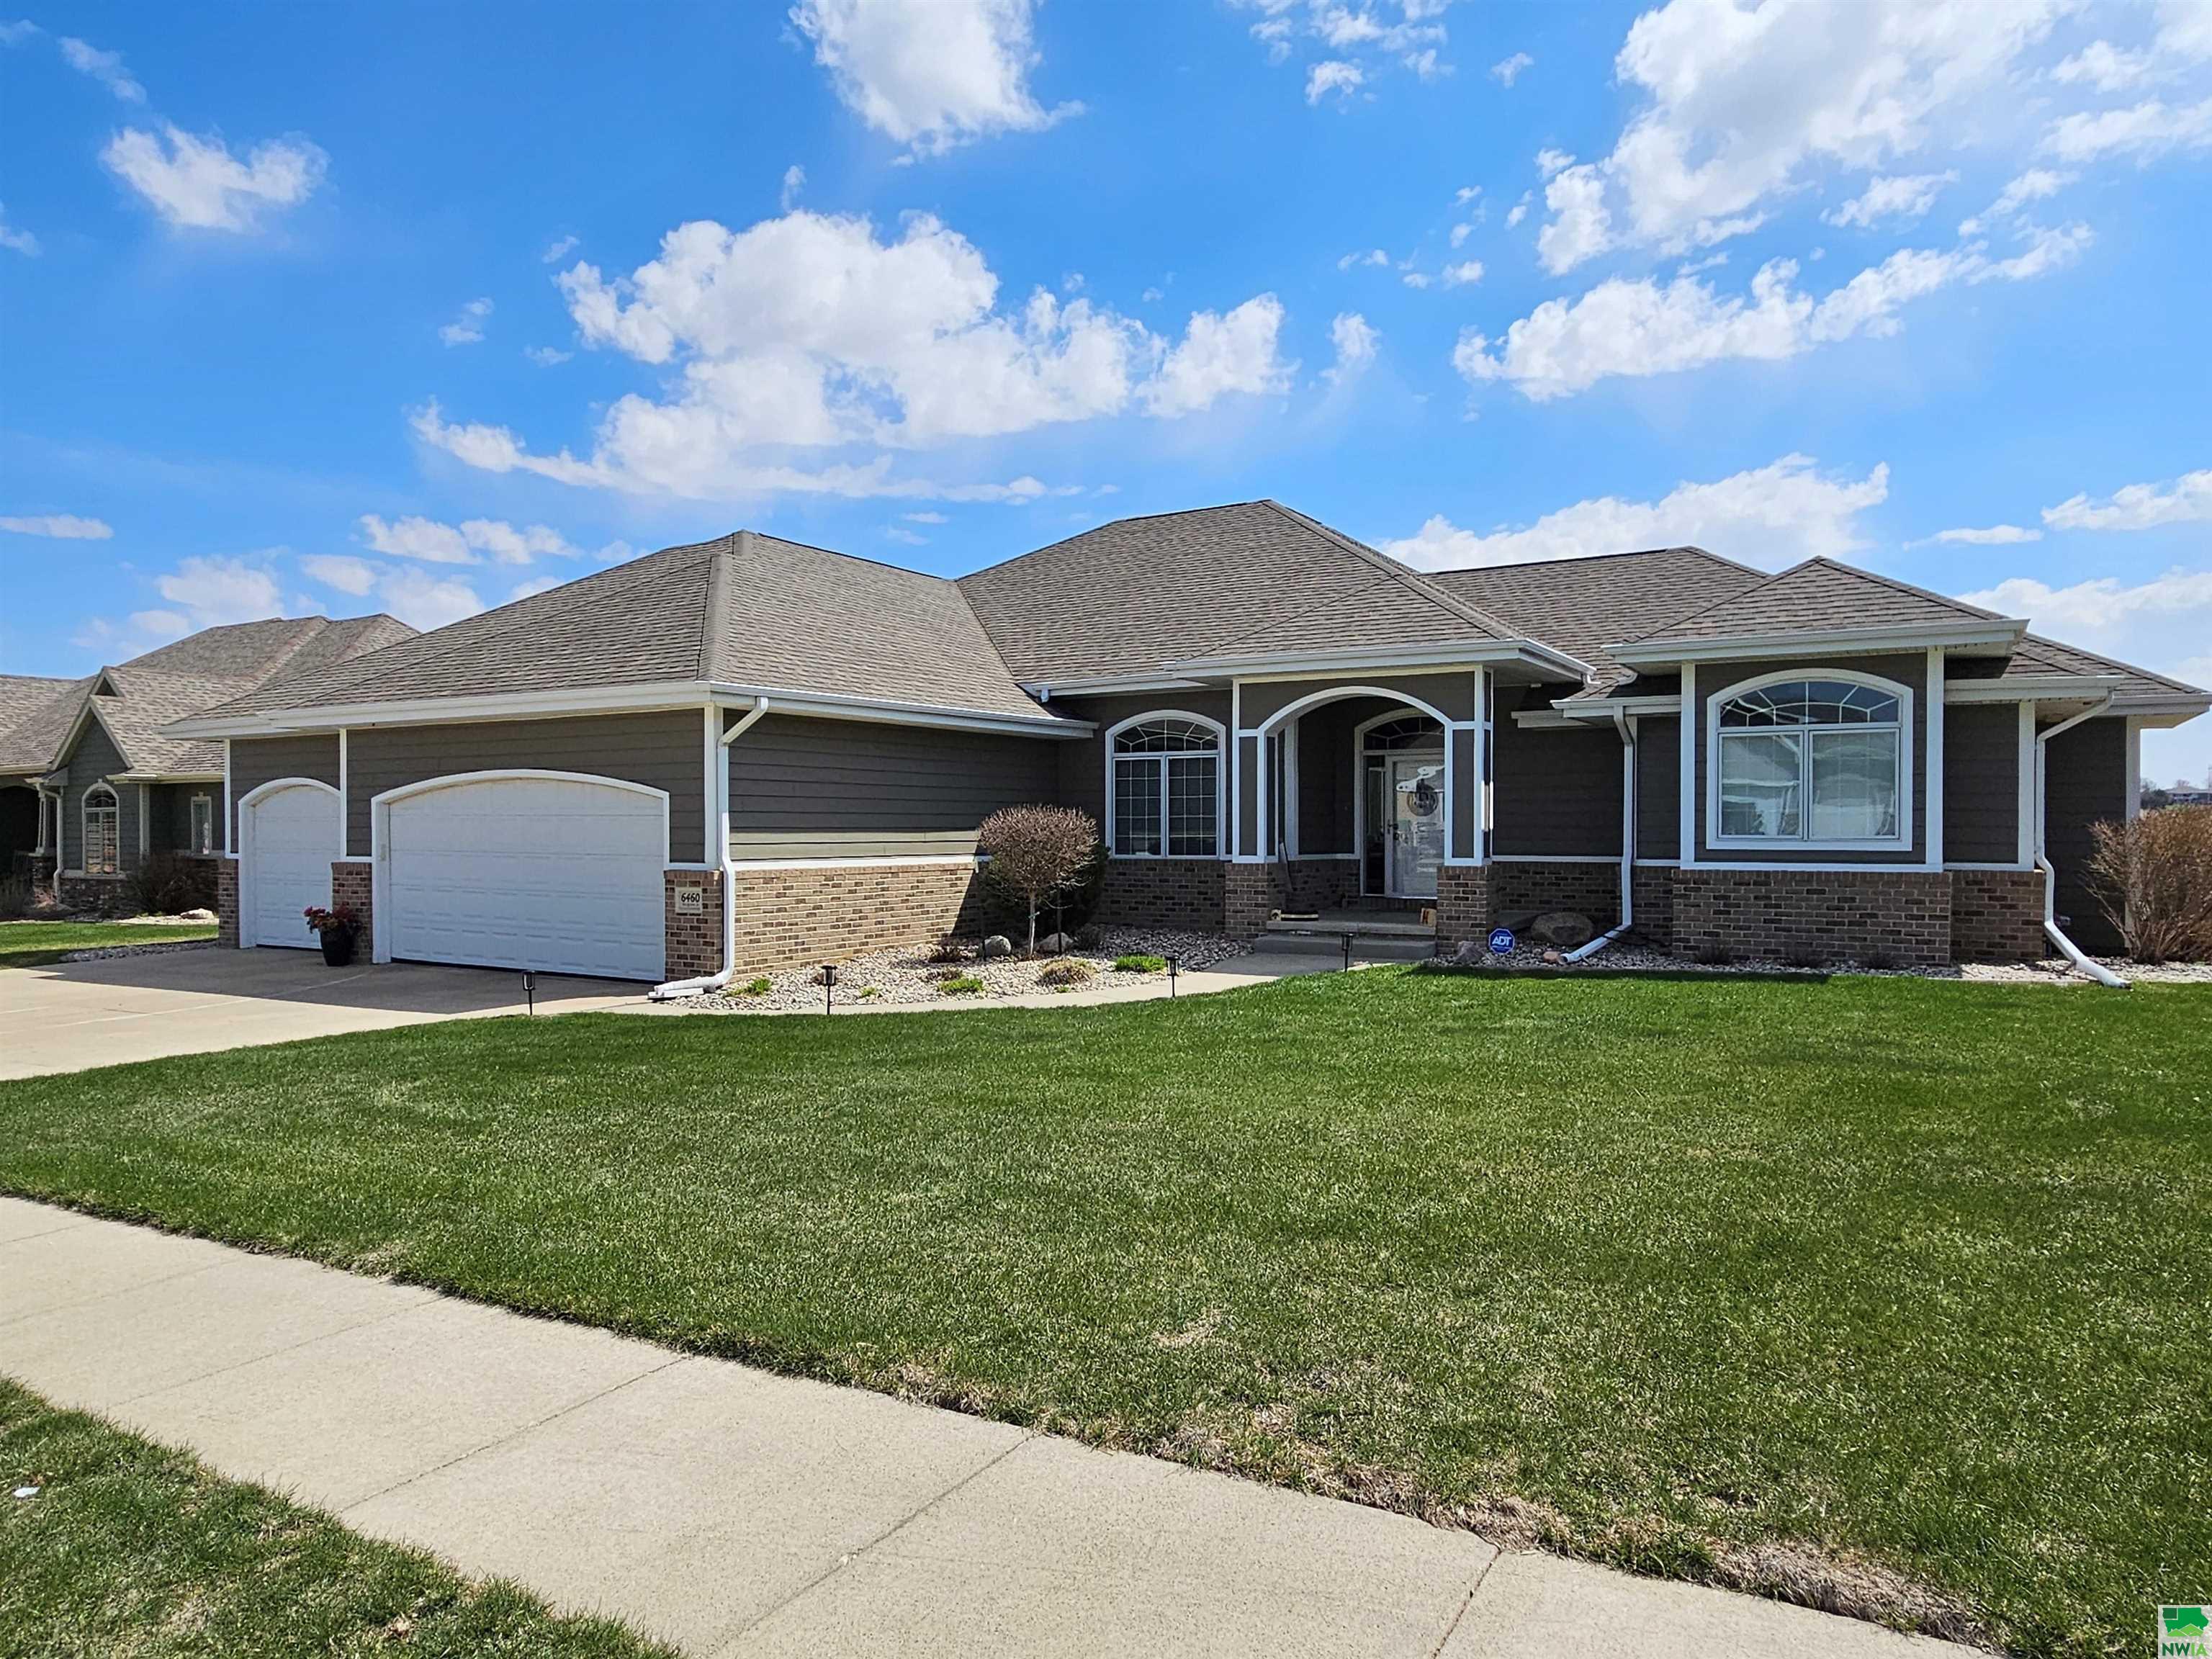 6460 Mickelson St, Sioux City, Iowa 51106 